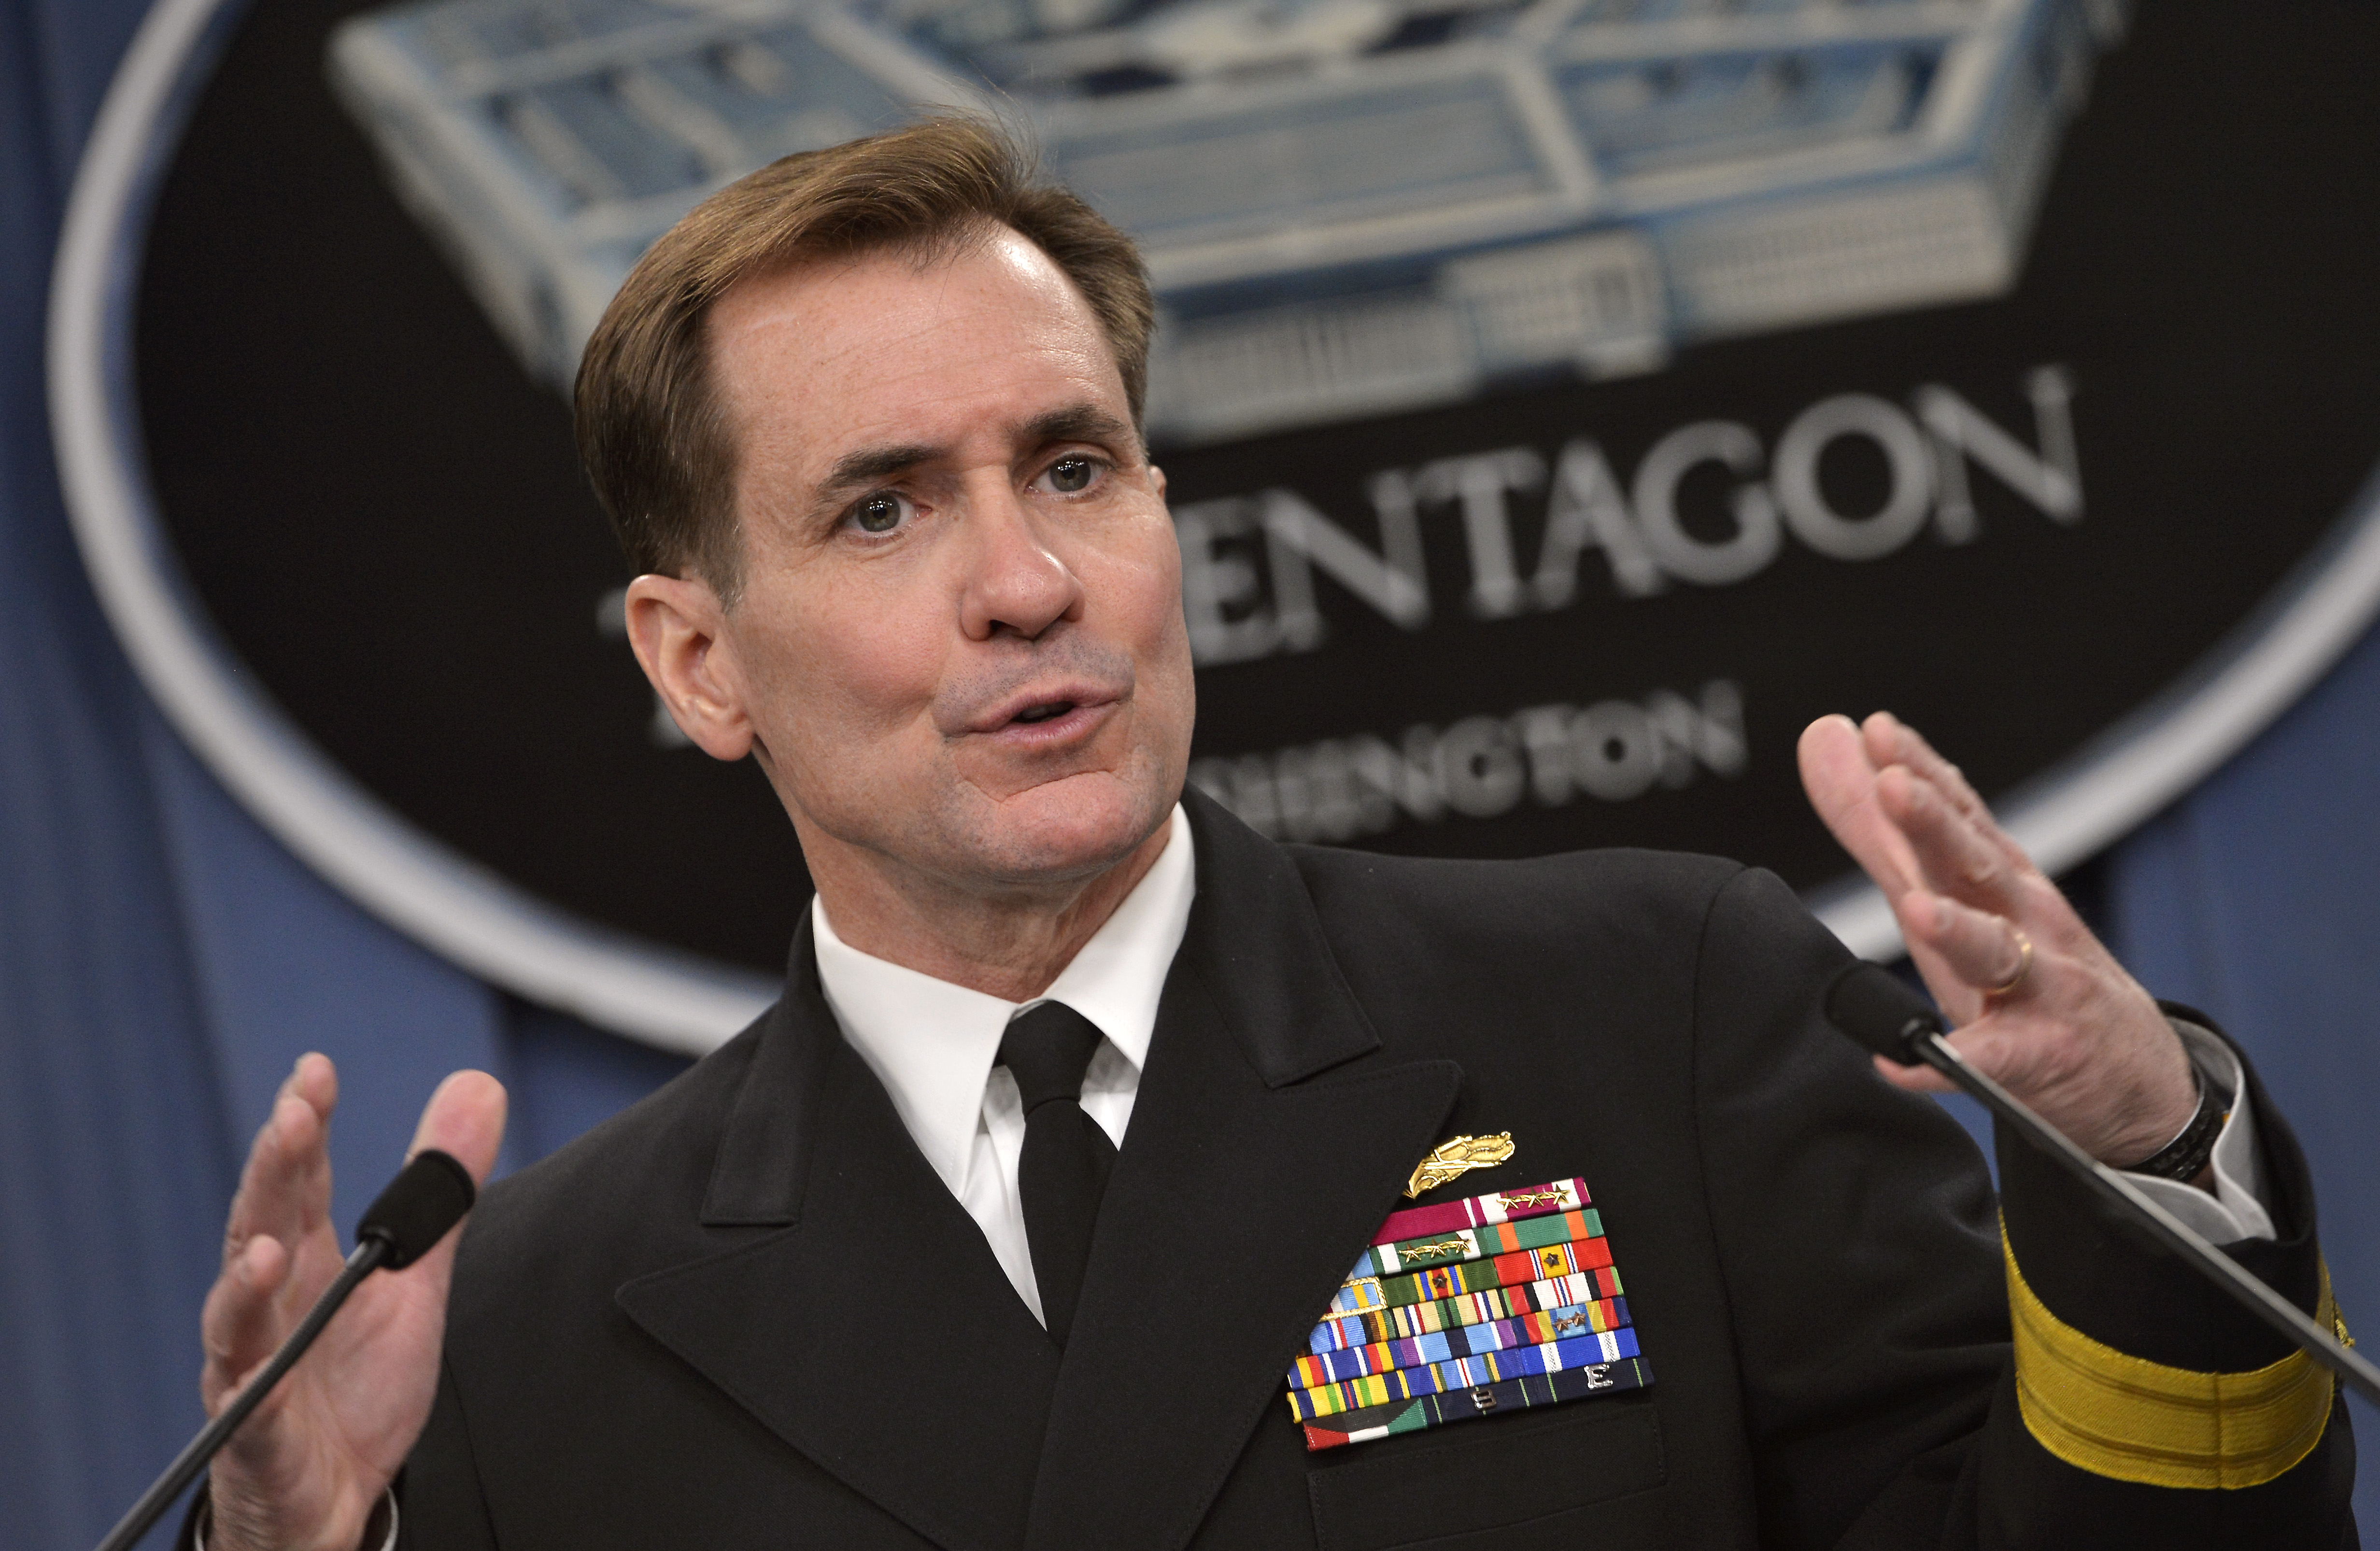 Pentagon Channel as Pentagon Press Secretary Navy Rear Adm. John Kirby briefs reporters in the Pentagon Press Briefing Room March 27, 2014. Kirby outlined objectives of Secretary of Defense Chuck Hagel's trip to Asia next week and as well took questions regarding the ongoing crisis in the Ukraine and search efforts for missing Malaysia Airlines Flight MH370. DoD Photo by Glenn Fawcett (Released)